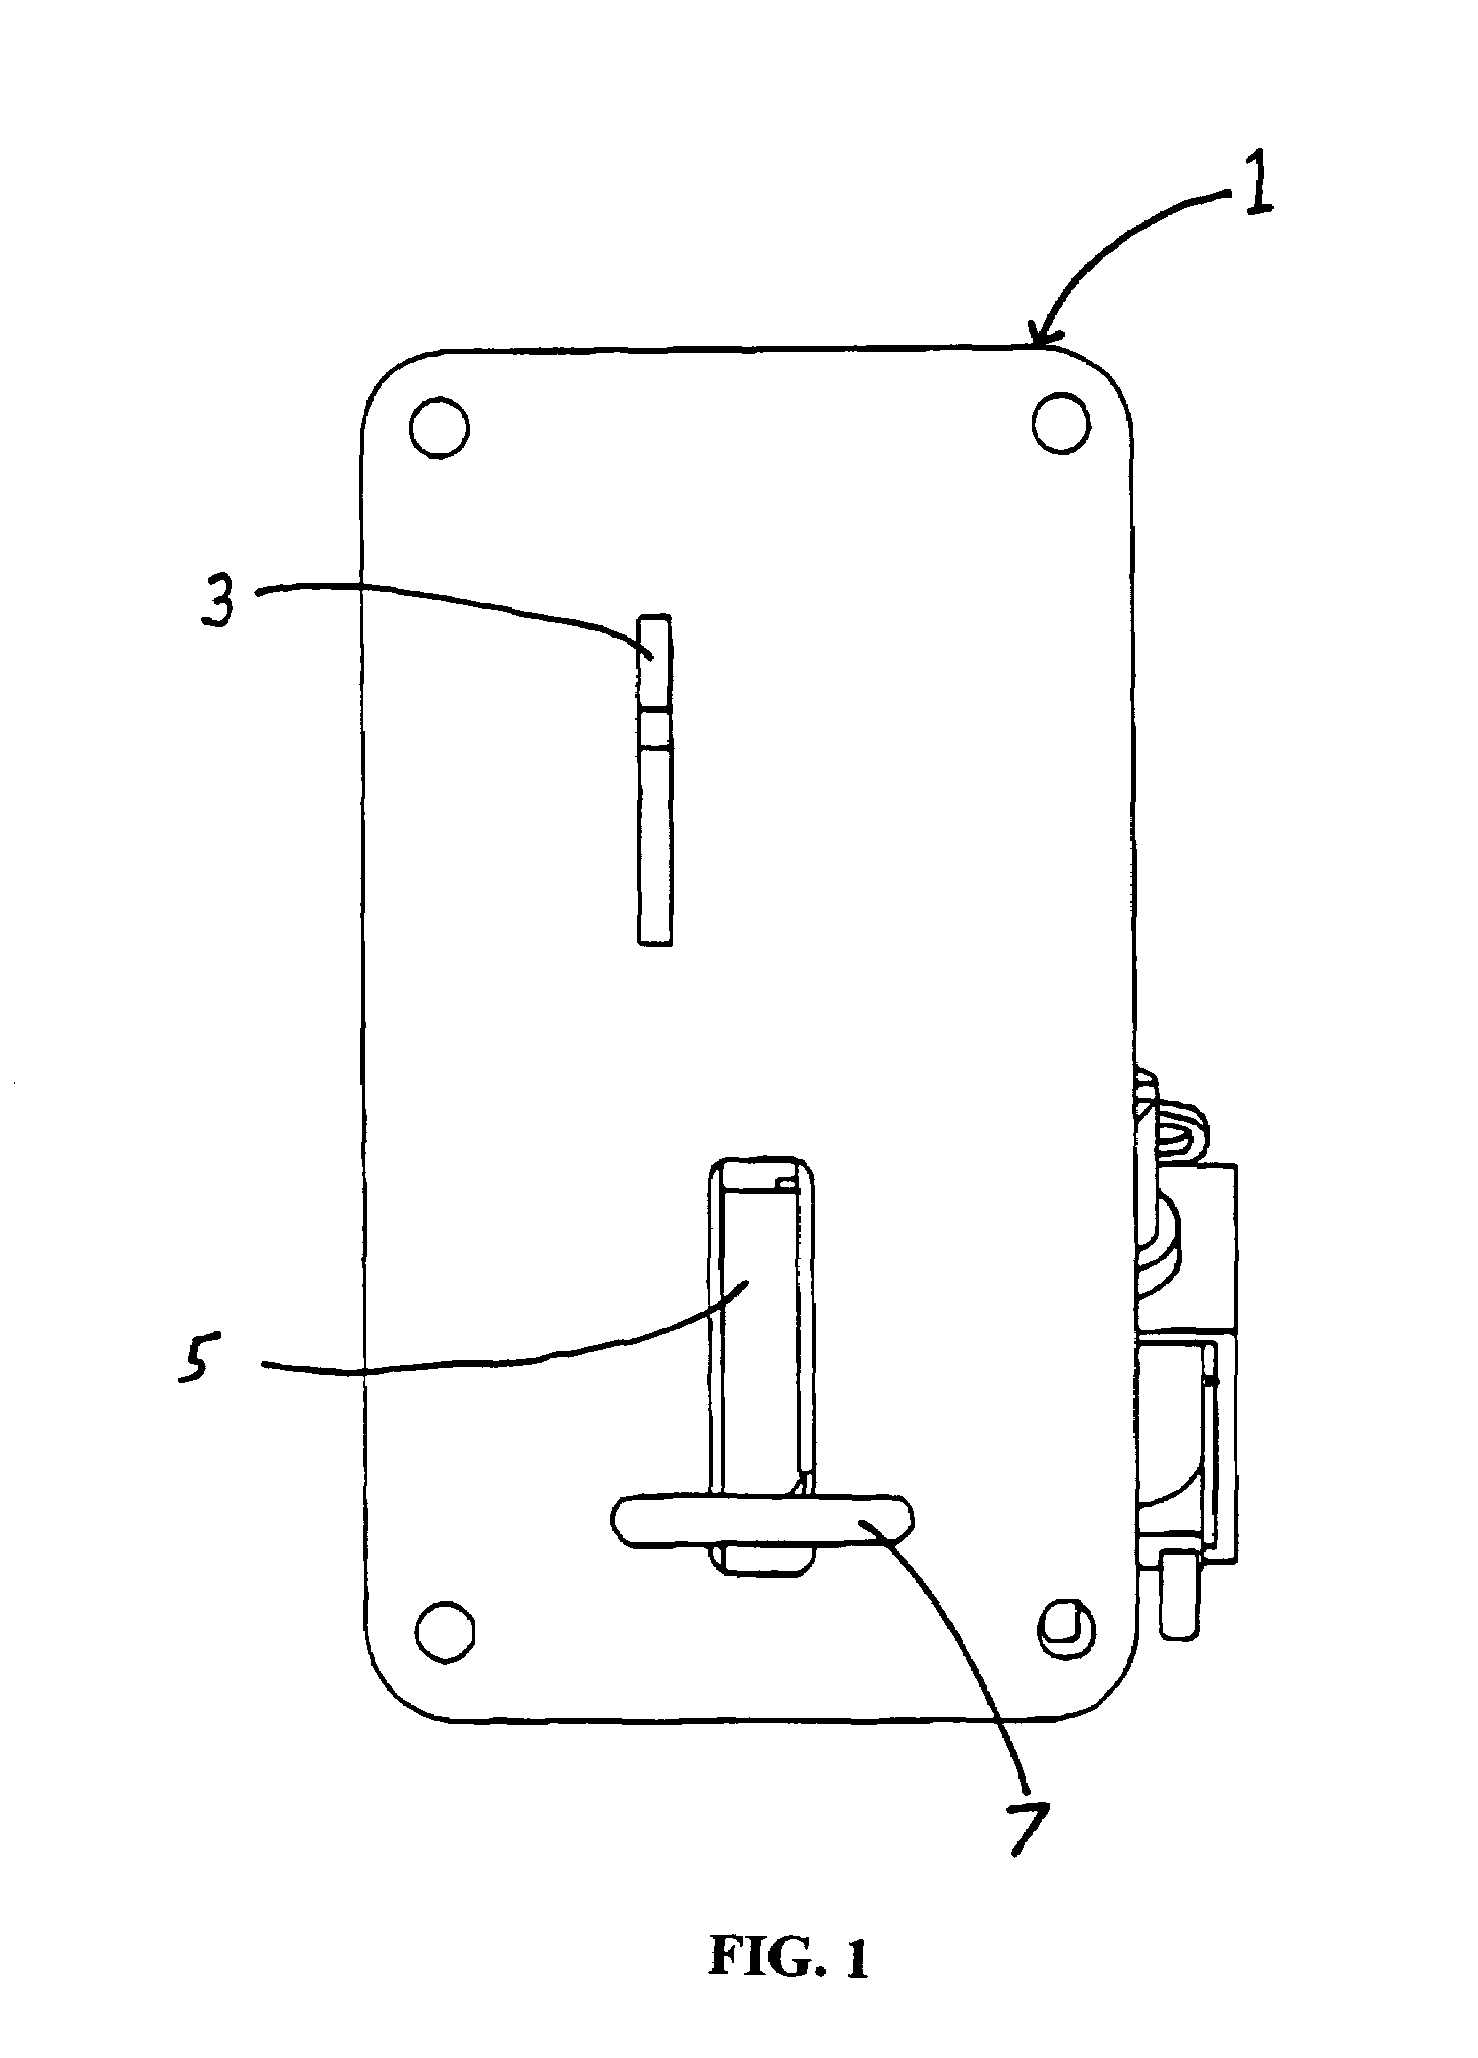 Apparatus and method for rejecting jammed coins